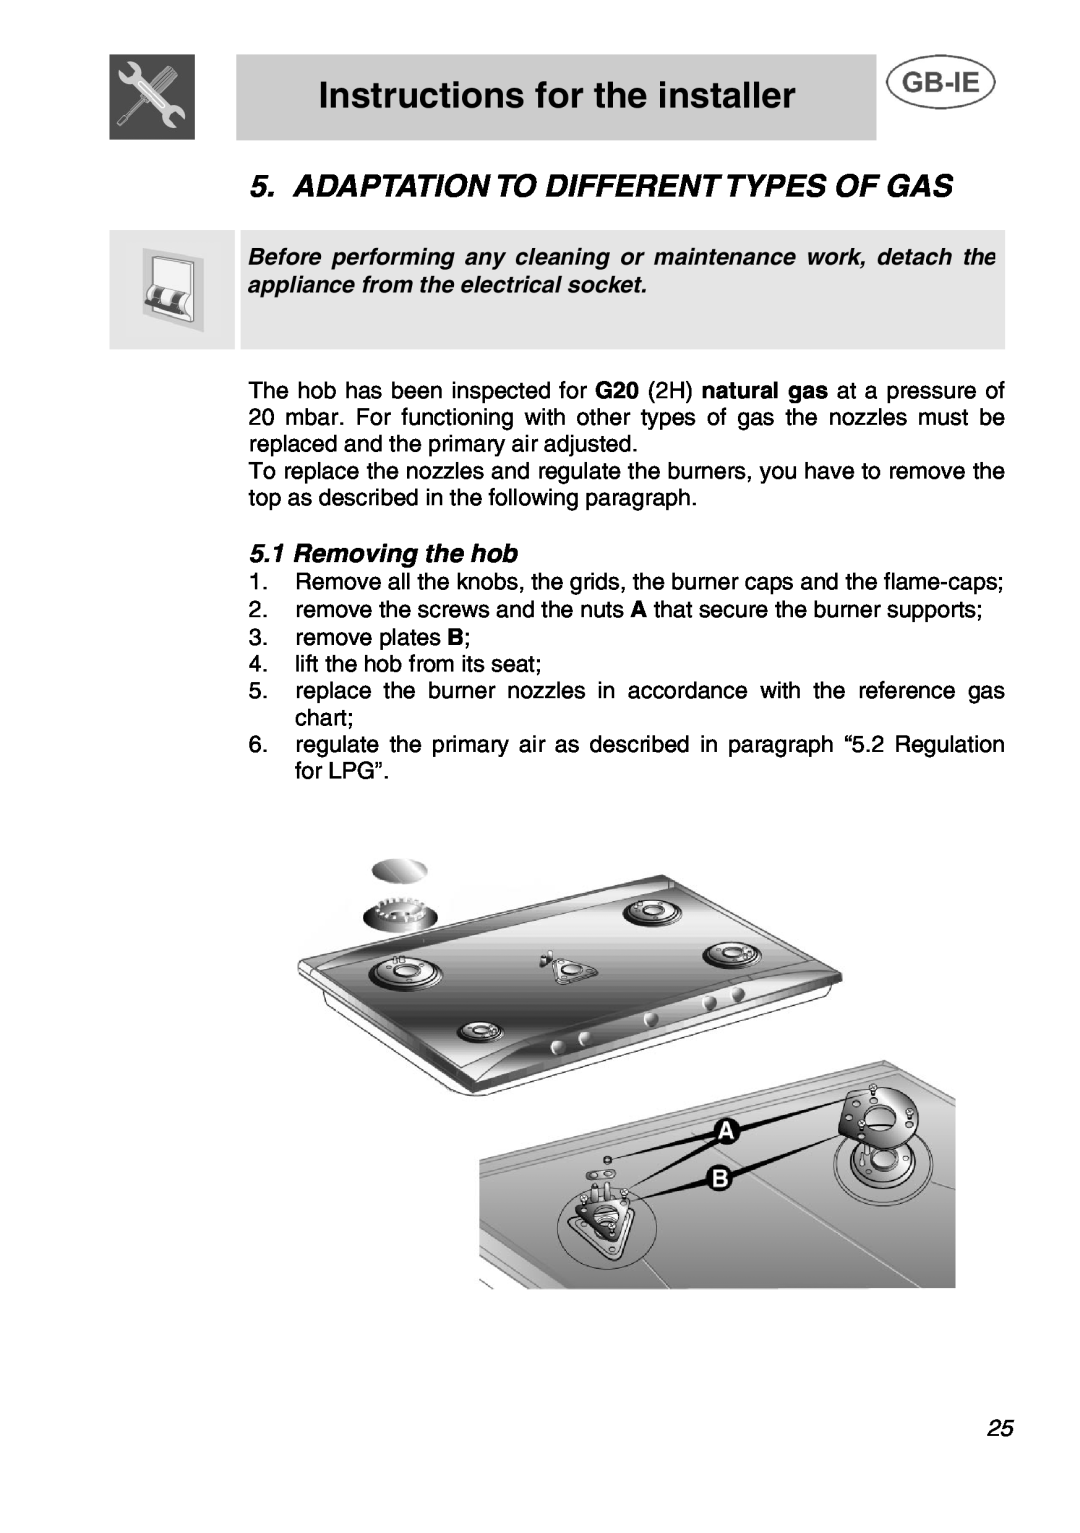 Smeg T2740N1NL manual Adaptation To Different Types Of Gas, Removing the hob, Instructions for the installer 